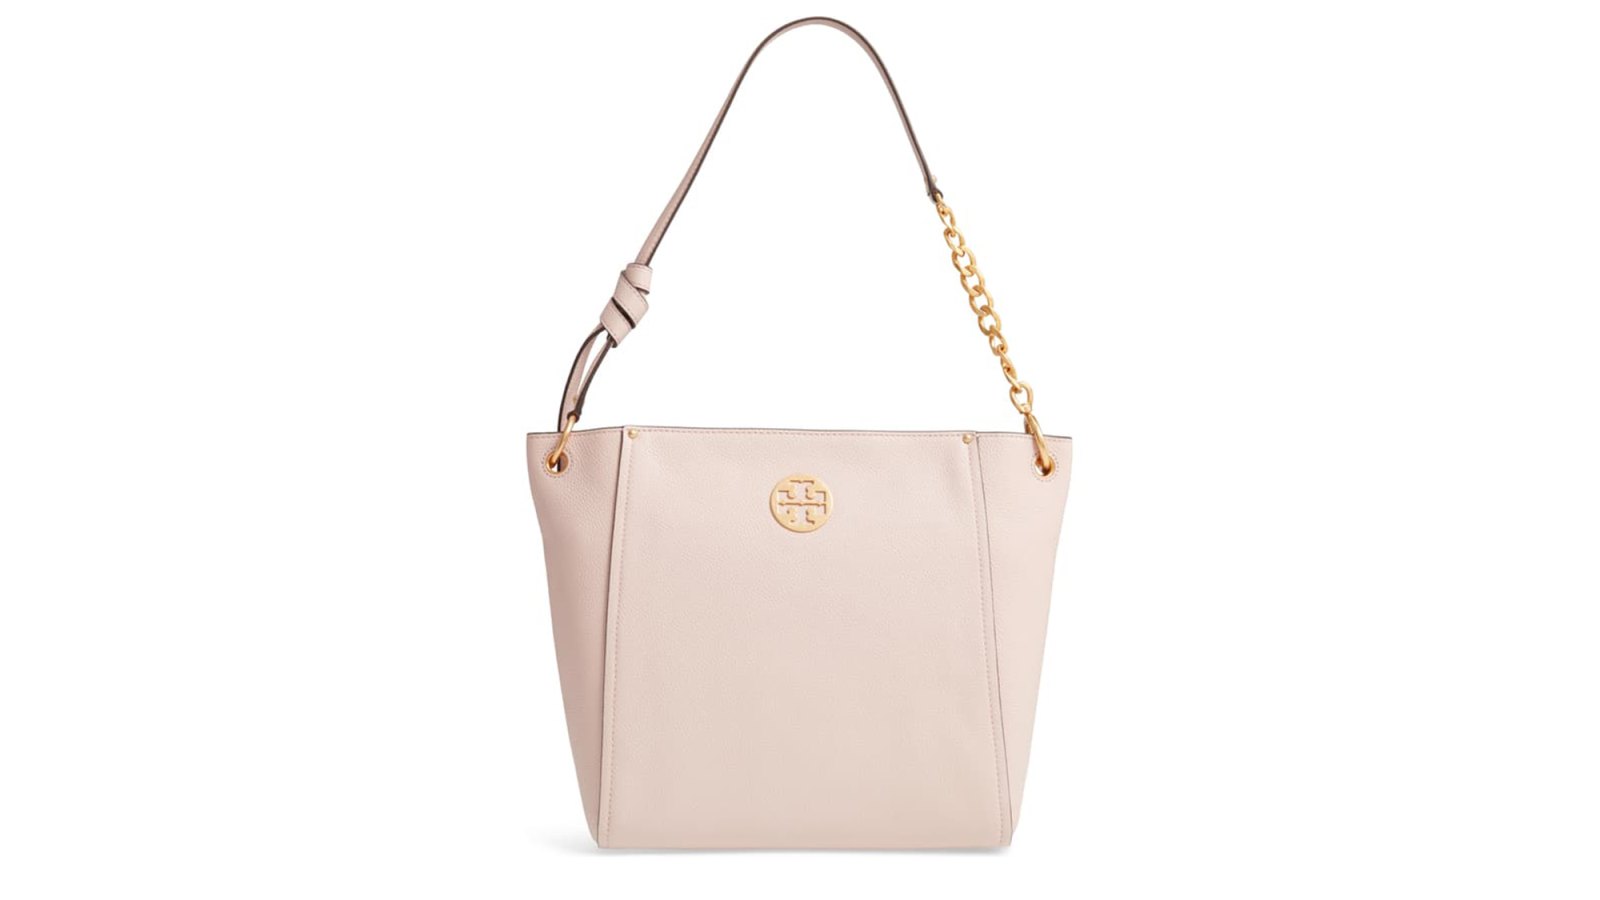 Tory Burch Everly Leather Hobo